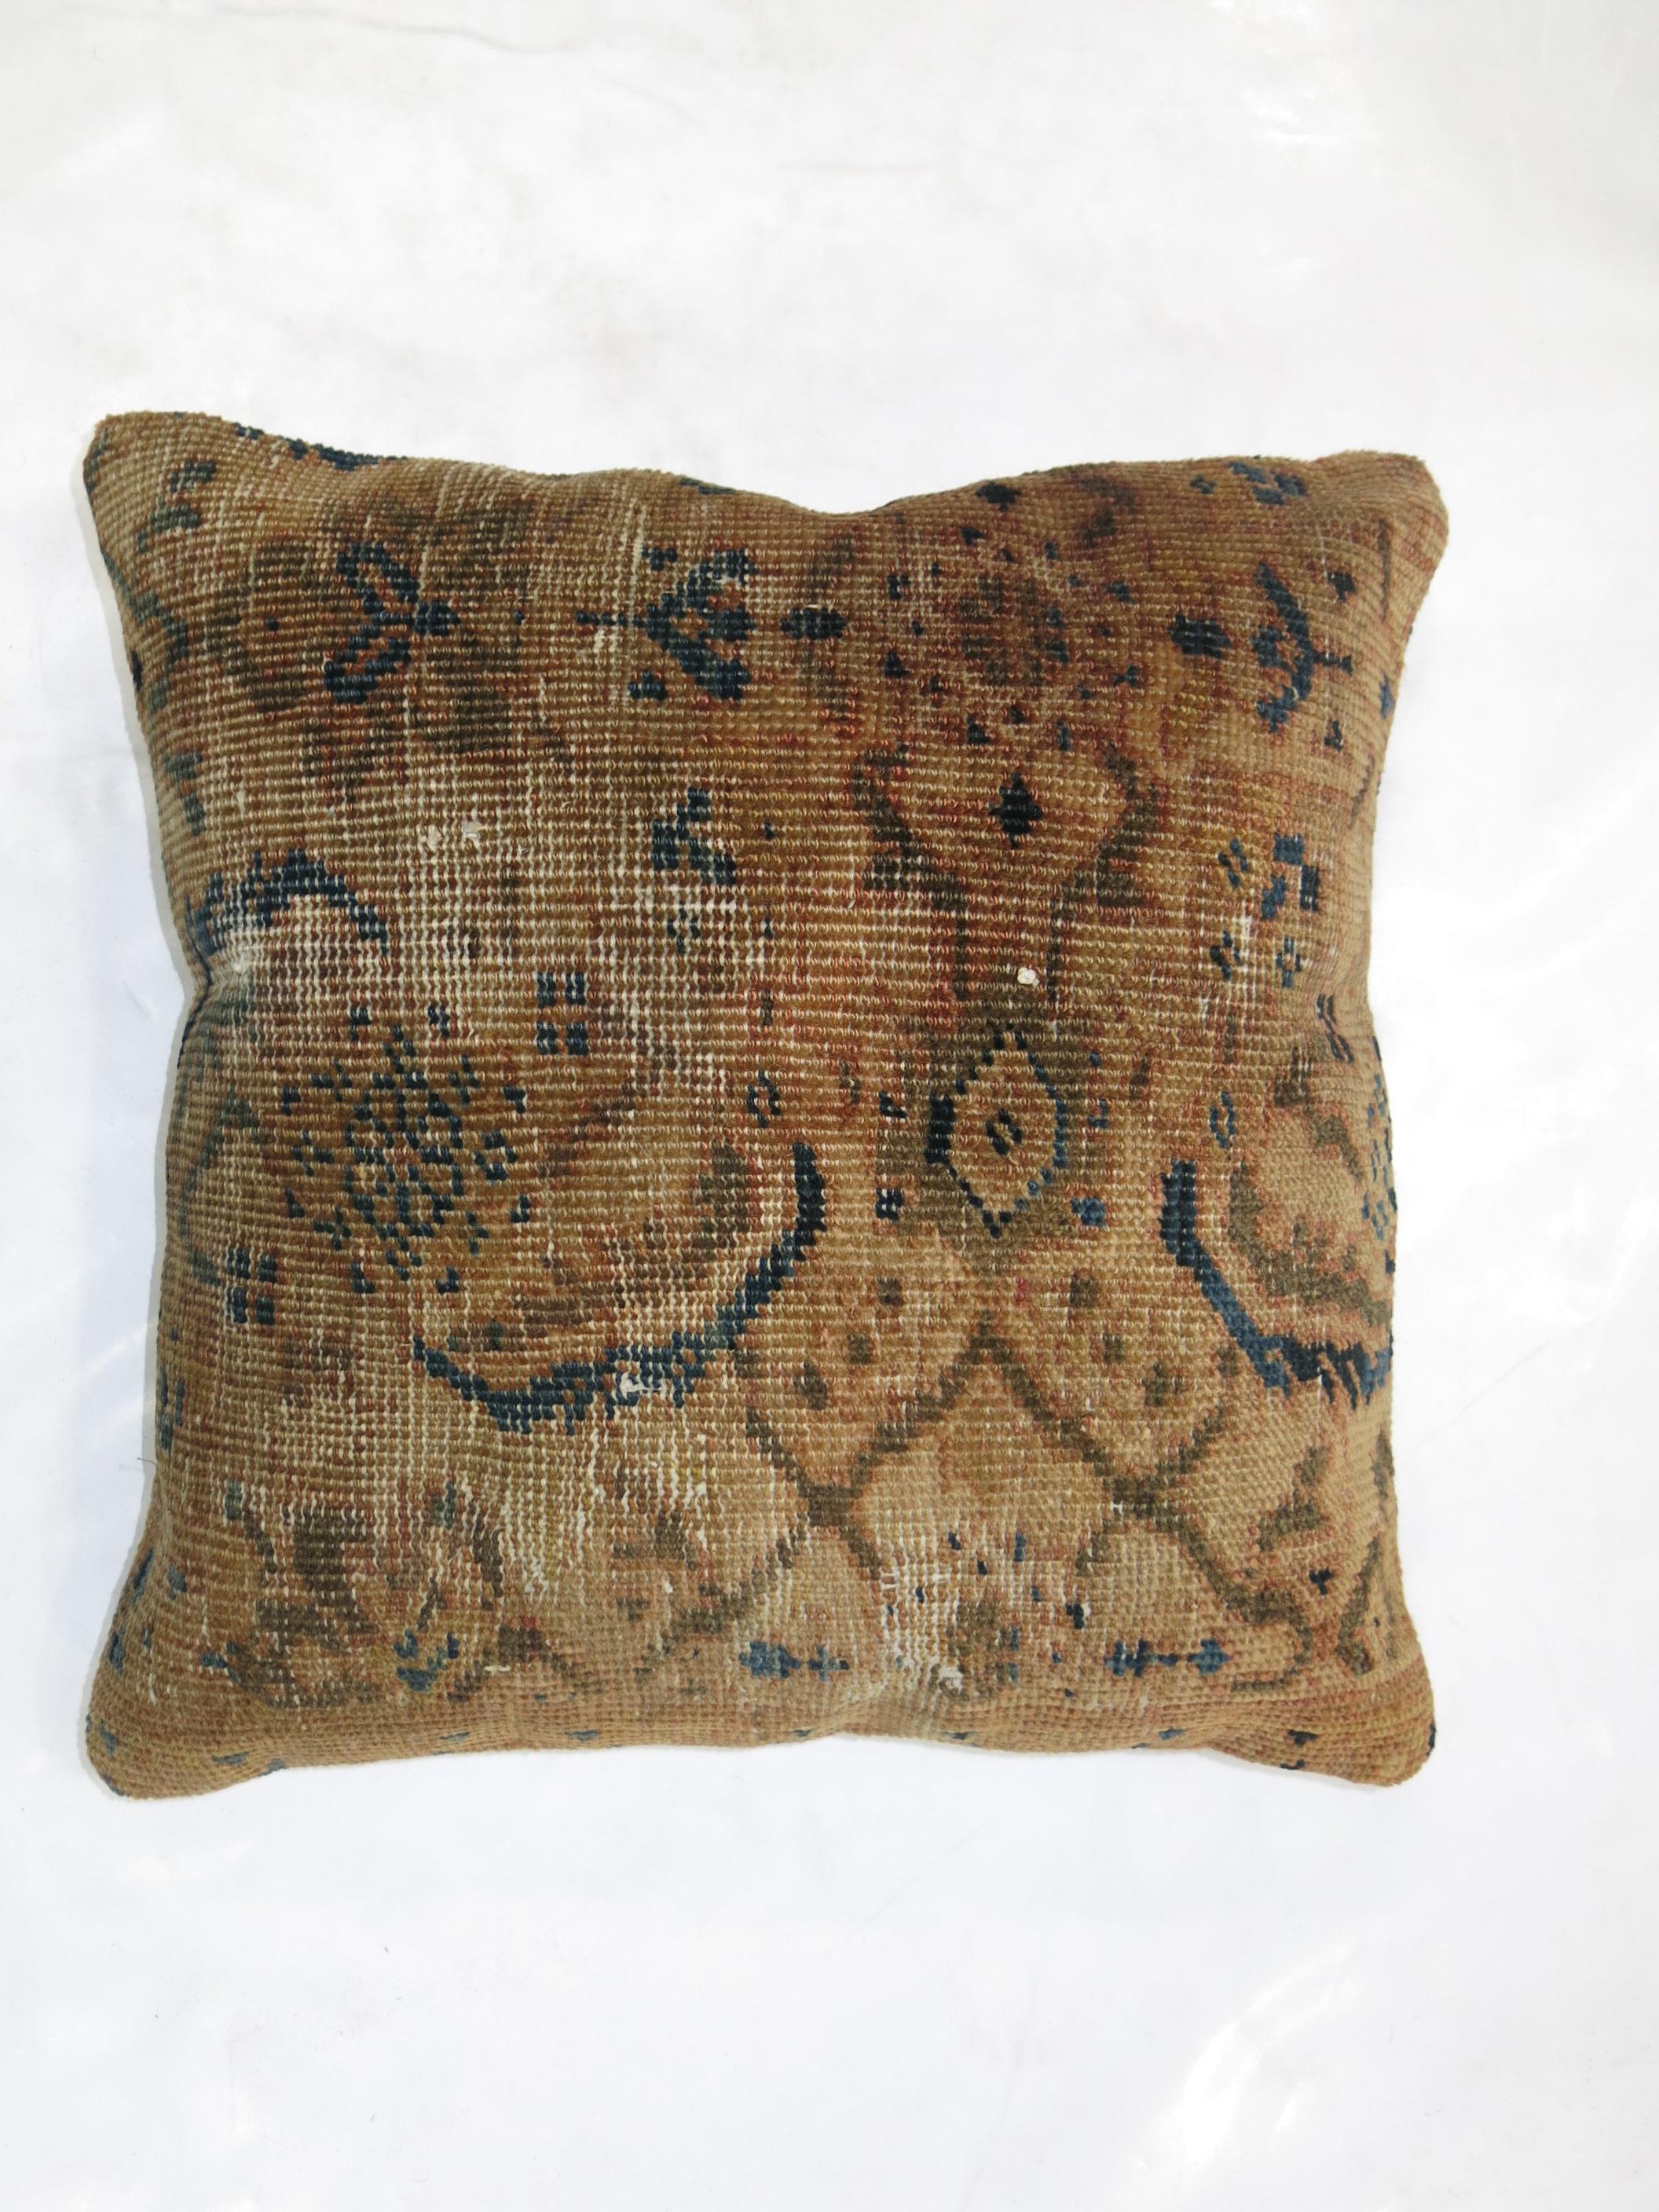 Sultanabad Shabby Chic Antique Persian Mahal Rug Pillow